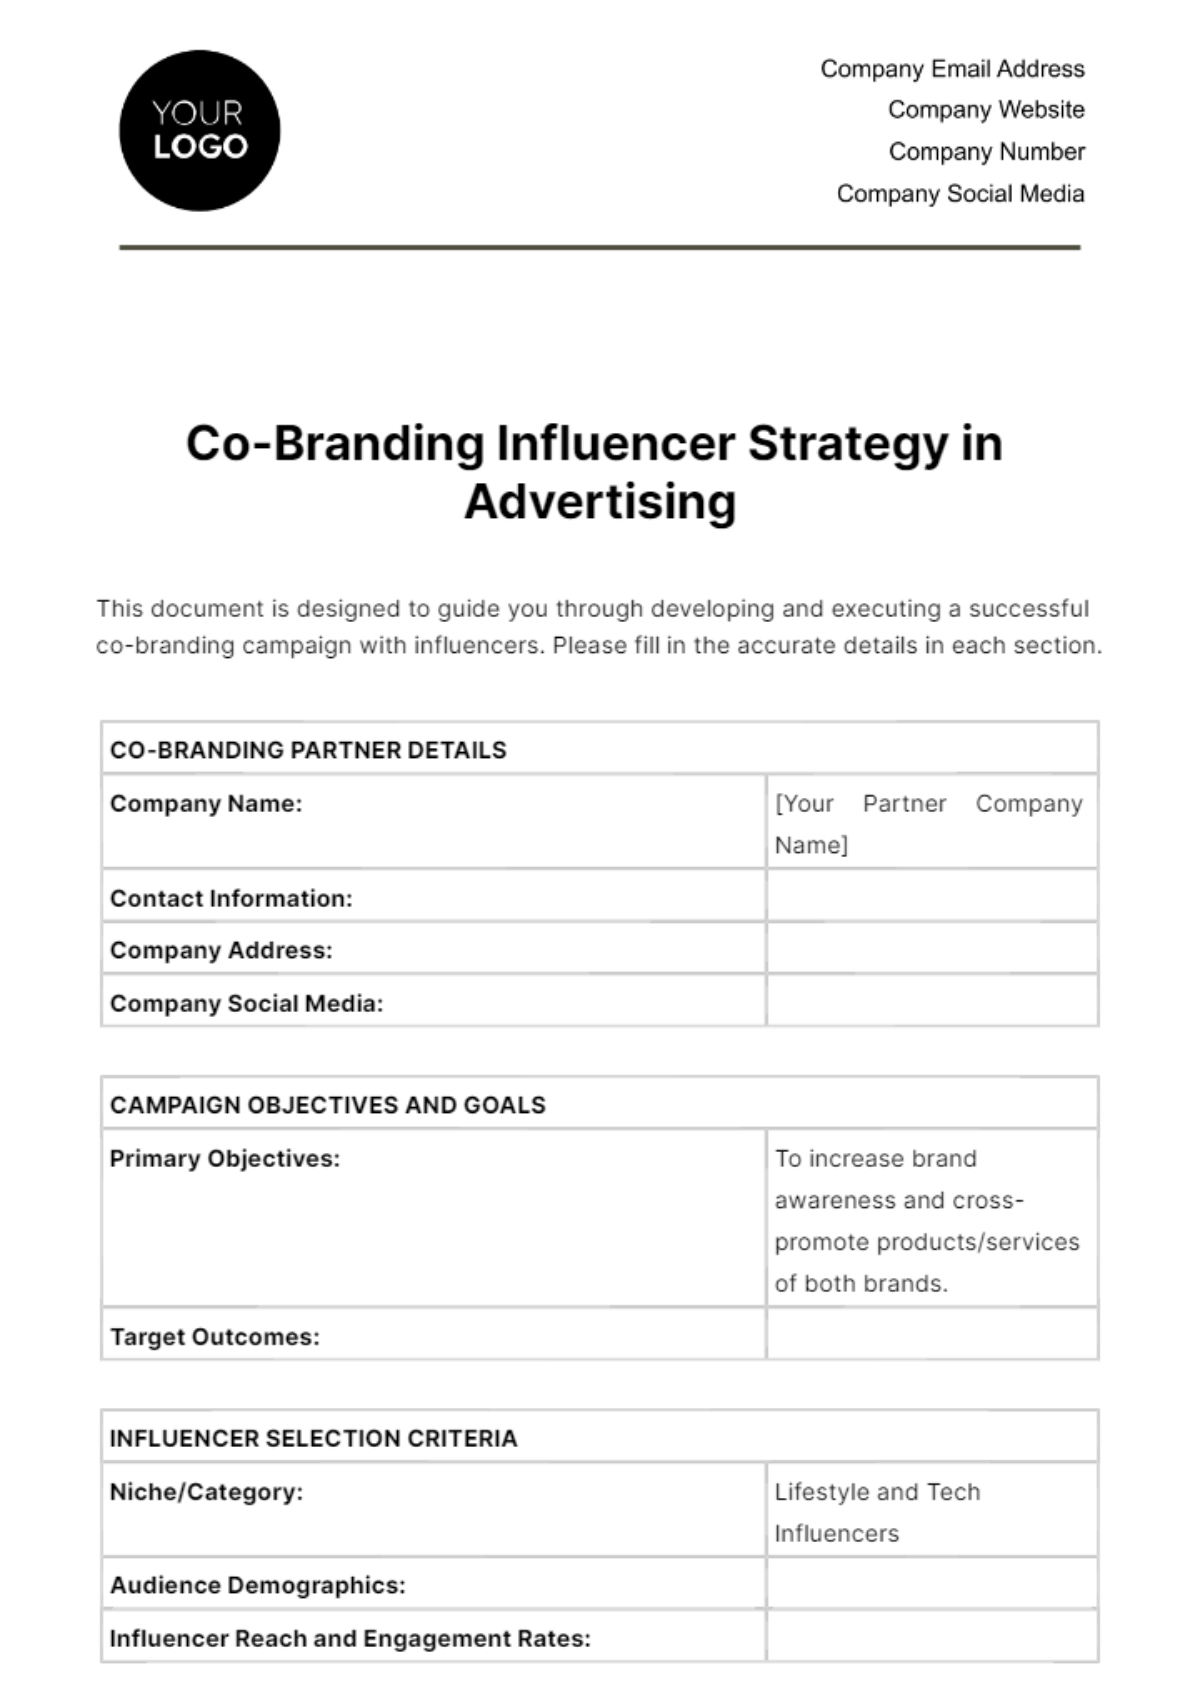 Free Co-Branding Influencer Strategy in Advertising Template